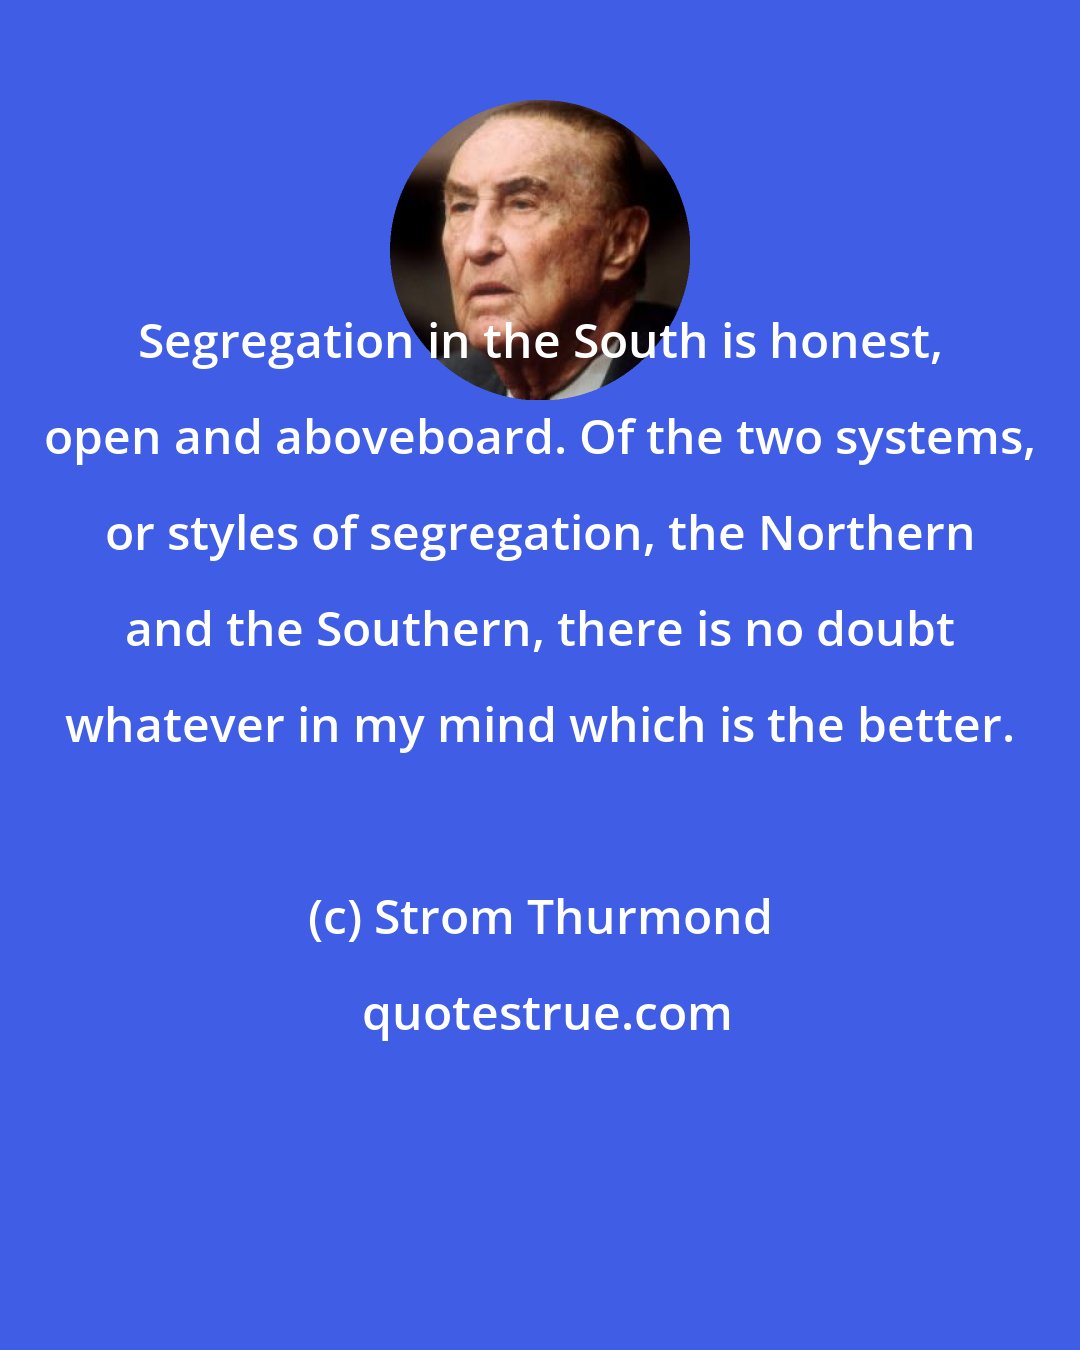 Strom Thurmond: Segregation in the South is honest, open and aboveboard. Of the two systems, or styles of segregation, the Northern and the Southern, there is no doubt whatever in my mind which is the better.